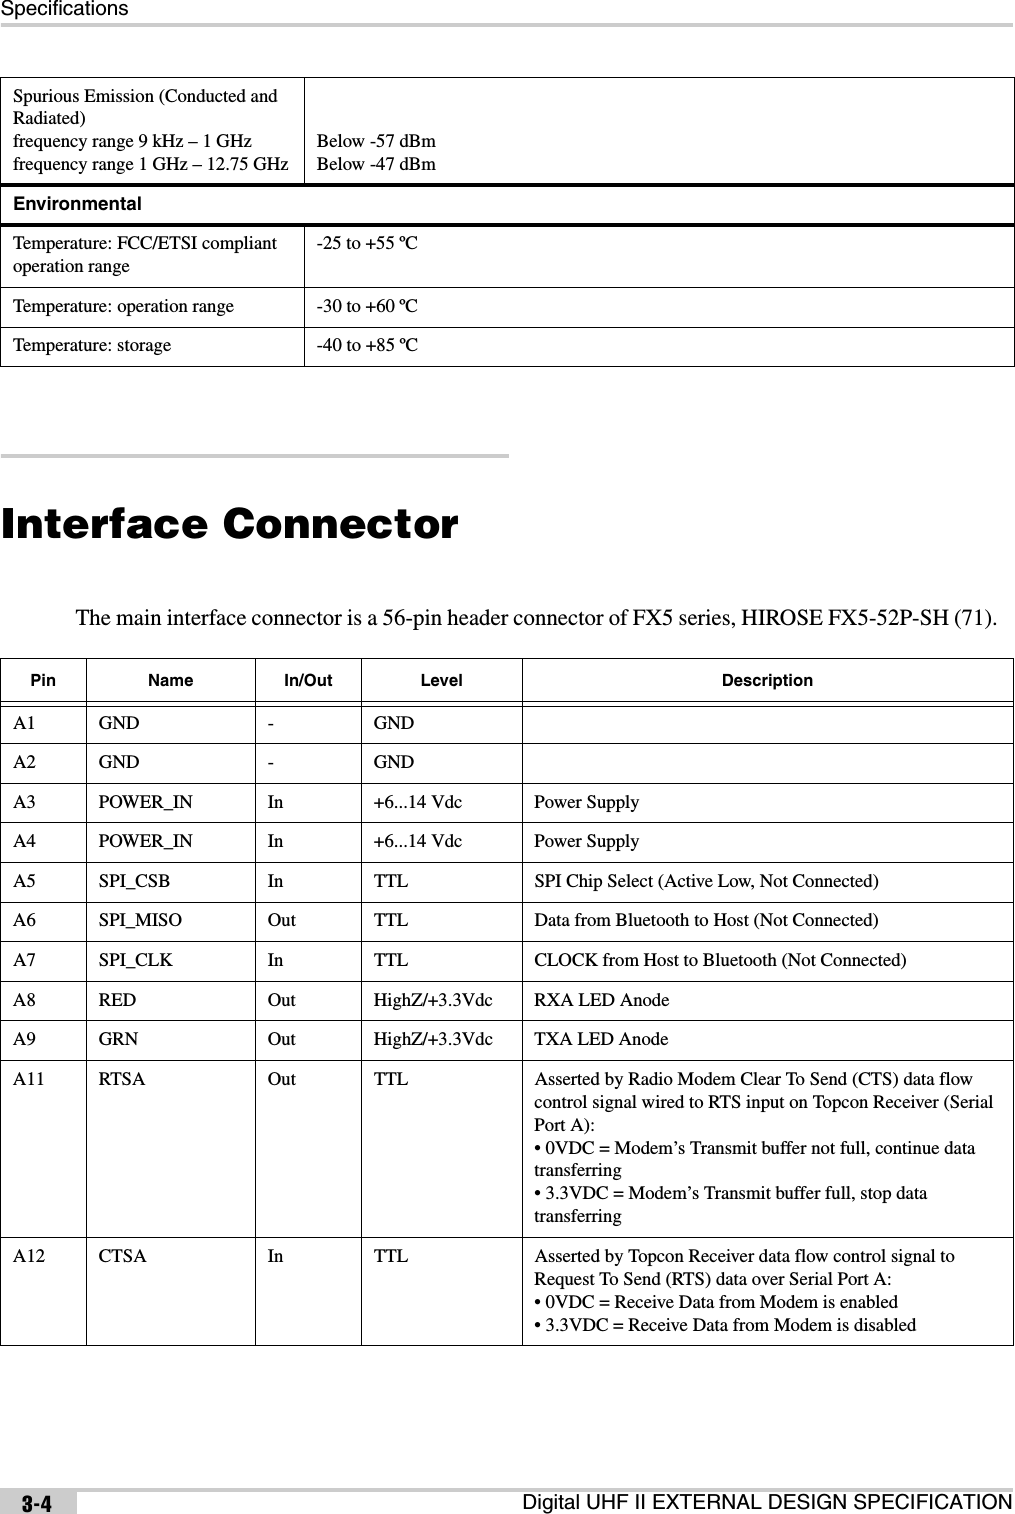 SpecificationsDigital UHF II EXTERNAL DESIGN SPECIFICATION3-4Interface Connector The main interface connector is a 56-pin header connector of FX5 series, HIROSE FX5-52P-SH (71).   Spurious Emission (Conducted and Radiated)frequency range 9 kHz – 1 GHzfrequency range 1 GHz – 12.75 GHzBelow -57 dBmBelow -47 dBmEnvironmentalTemperature: FCC/ETSI compliant operation range-25 to +55 ºCTemperature: operation range -30 to +60 ºC Temperature: storage -40 to +85 ºCPin Name In/Out Level DescriptionA1 GND - GNDA2 GND - GNDA3 POWER_IN In +6...14 Vdc Power SupplyA4 POWER_IN In +6...14 Vdc Power SupplyA5 SPI_CSB In TTL SPI Chip Select (Active Low, Not Connected)A6 SPI_MISO Out TTL Data from Bluetooth to Host (Not Connected)A7 SPI_CLK In TTL CLOCK from Host to Bluetooth (Not Connected)A8 RED Out HighZ/+3.3Vdc RXA LED AnodeA9 GRN Out HighZ/+3.3Vdc TXA LED AnodeA11 RTSA Out TTL Asserted by Radio Modem Clear To Send (CTS) data flow control signal wired to RTS input on Topcon Receiver (Serial Port A):• 0VDC = Modem’s Transmit buffer not full, continue data transferring• 3.3VDC = Modem’s Transmit buffer full, stop data transferringA12 CTSA In TTL Asserted by Topcon Receiver data flow control signal to Request To Send (RTS) data over Serial Port A:• 0VDC = Receive Data from Modem is enabled• 3.3VDC = Receive Data from Modem is disabled